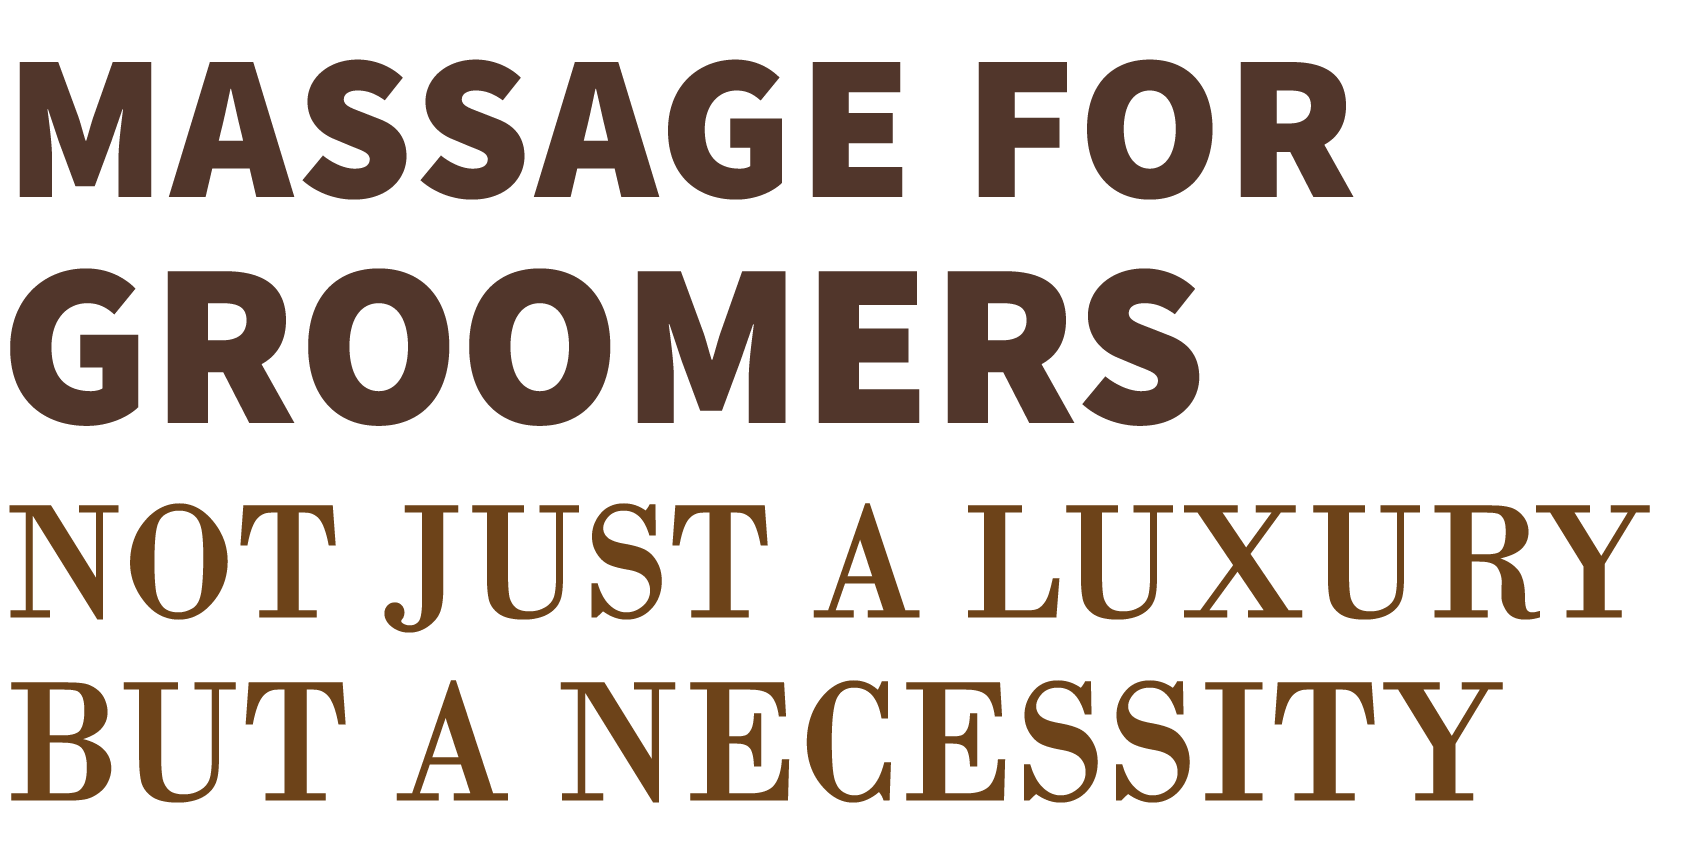 Massage for Groomers Not Just a Luxury But a Necessity